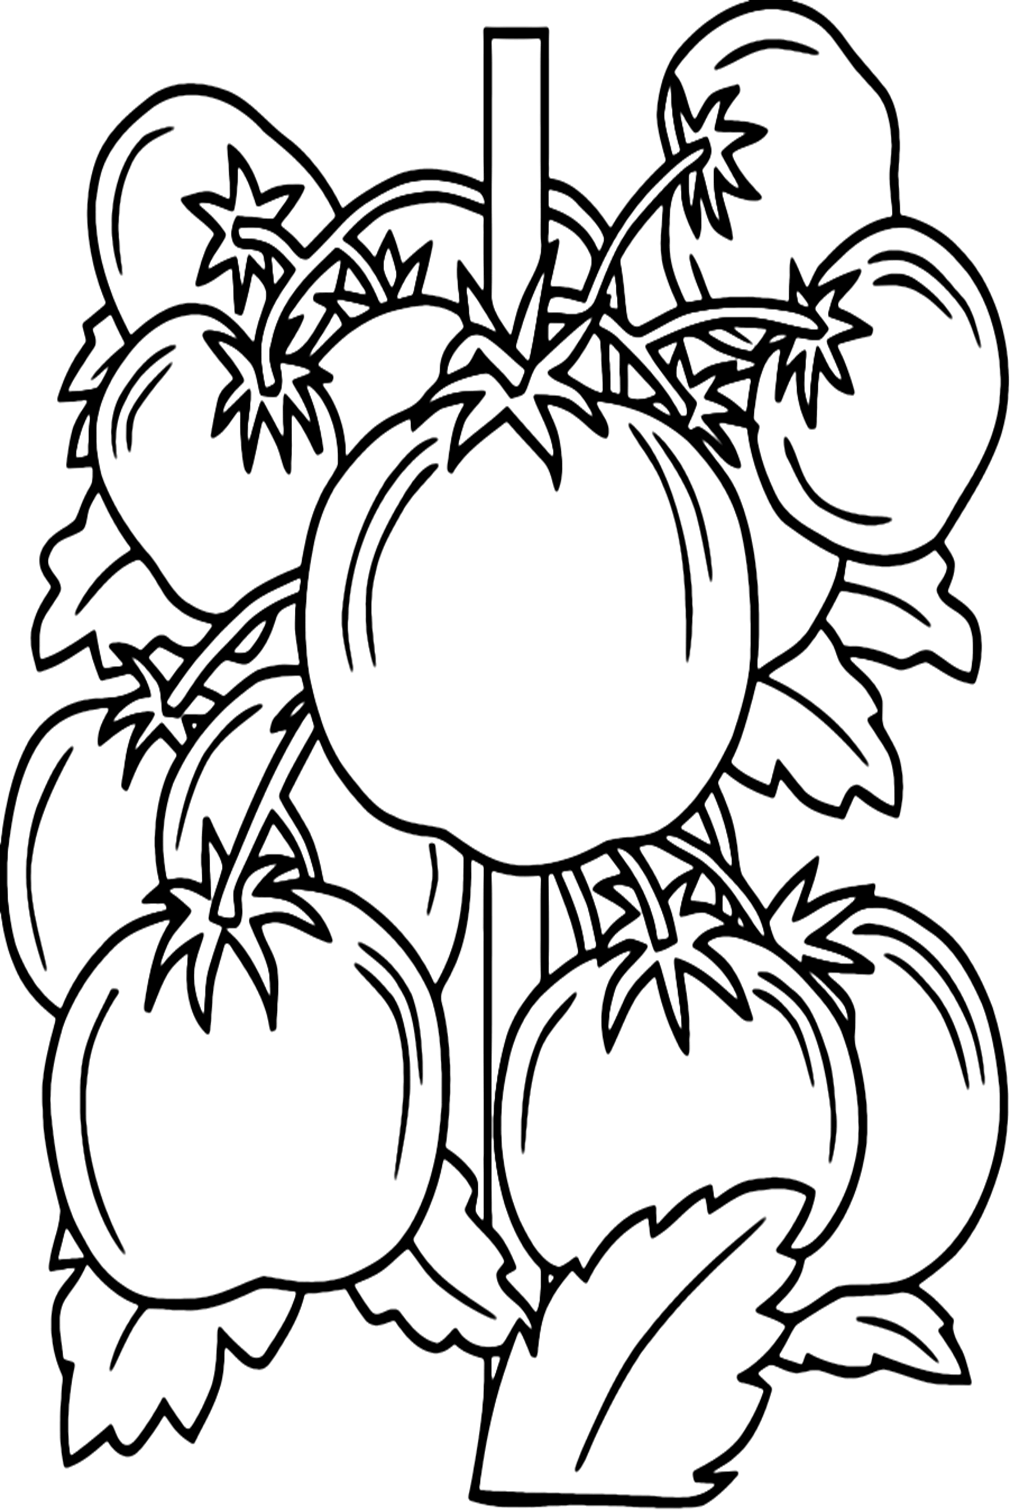 Coloring Pages Of Tomato